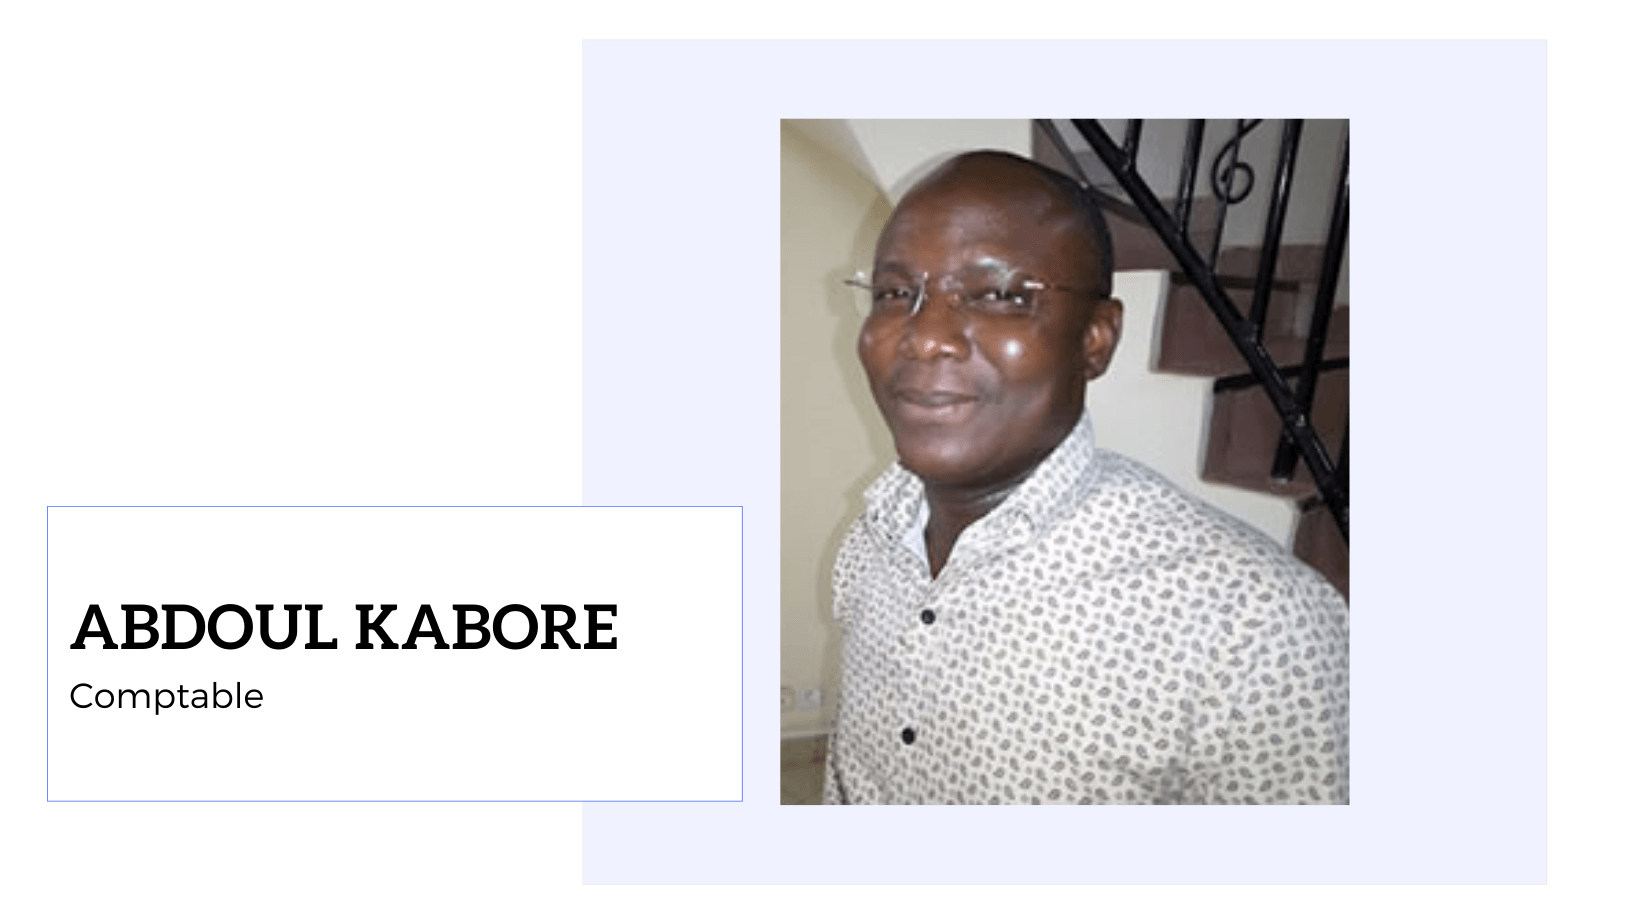 Abdoul KABORE<br />
Comptable